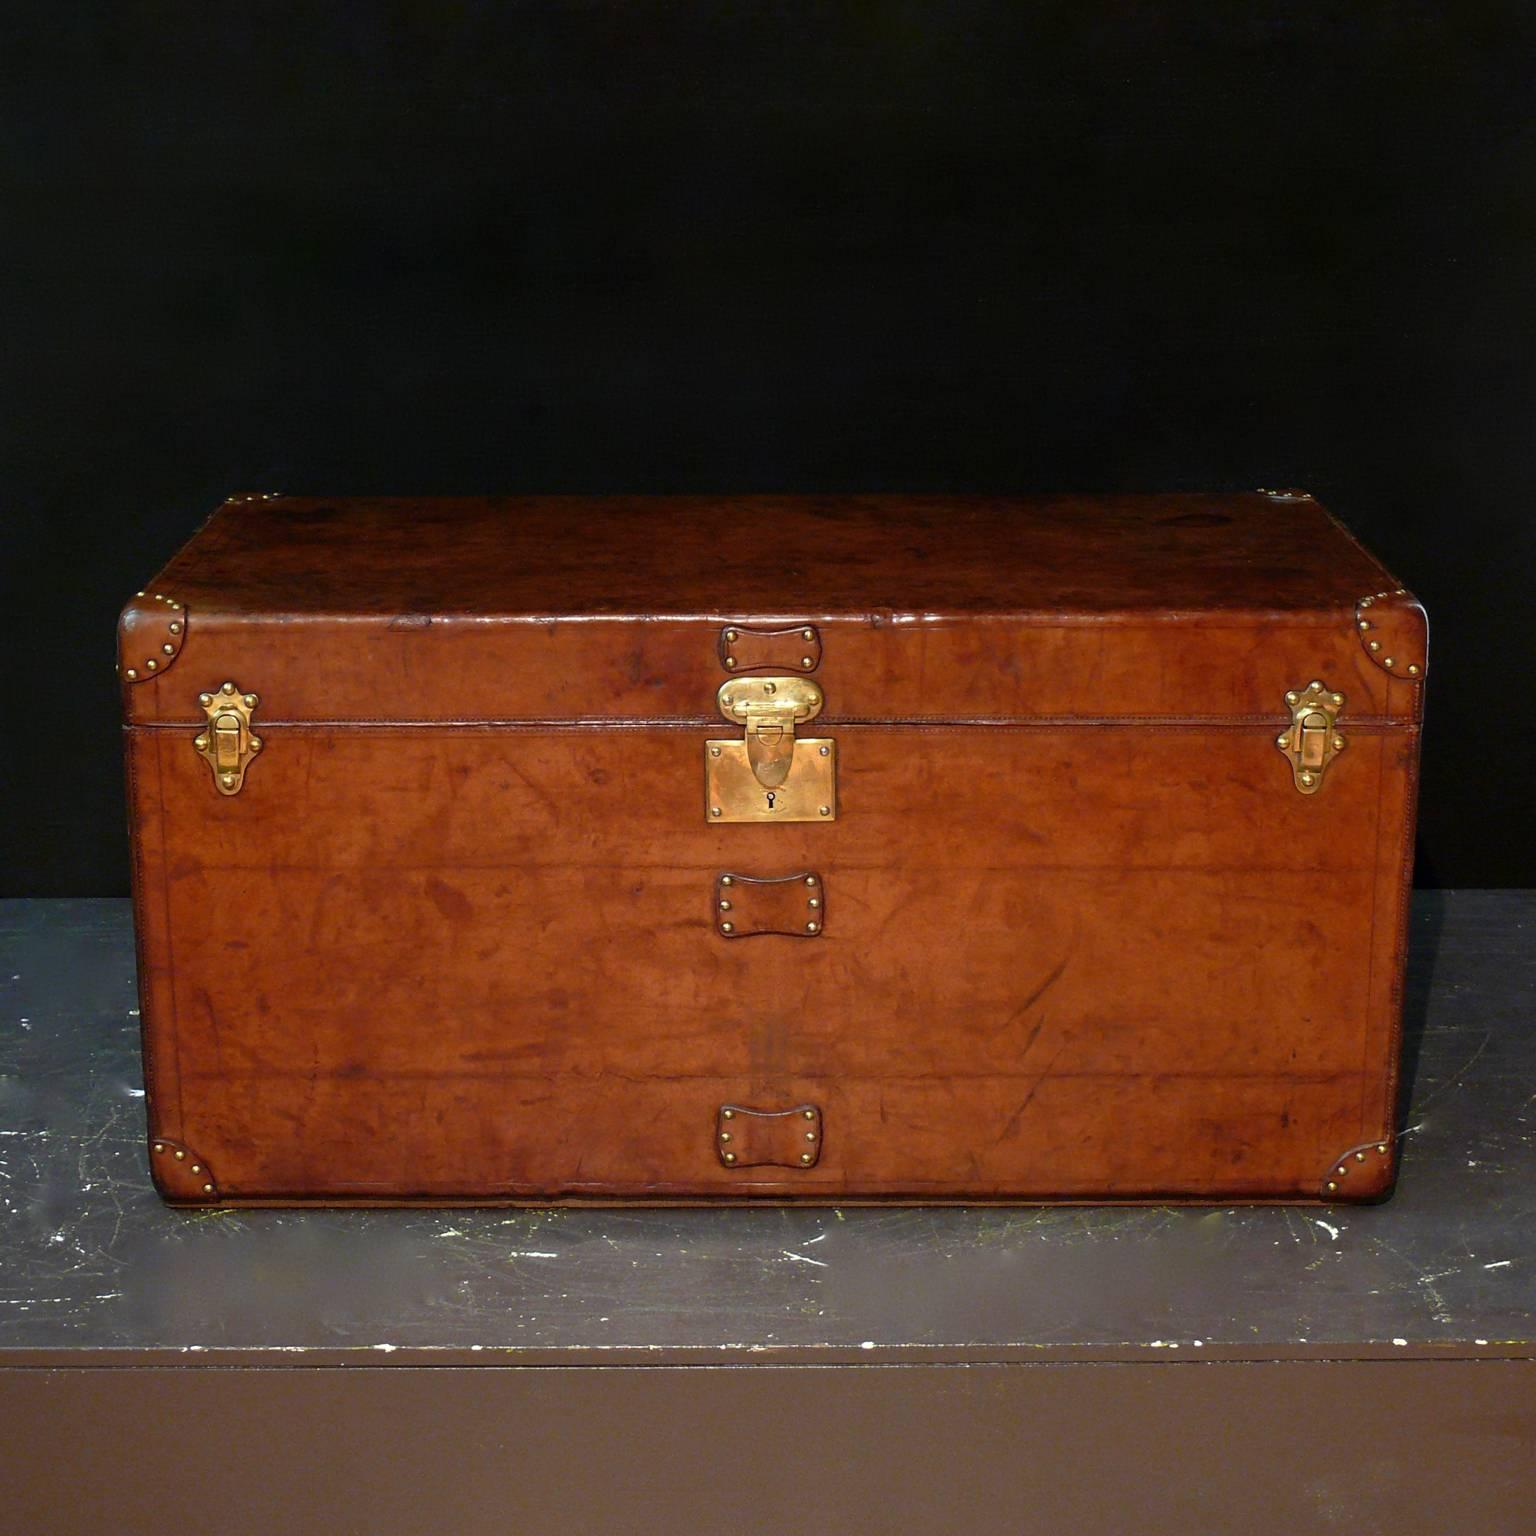 An Exceptional Goyard Leather Steamer Trunk with original cotton lined interior and brass catches & lock; c1910. Its particularly rare to find all-leather Goyard trunks and the quality of this example is superb. 
Louis Vuitton and Goyard were the